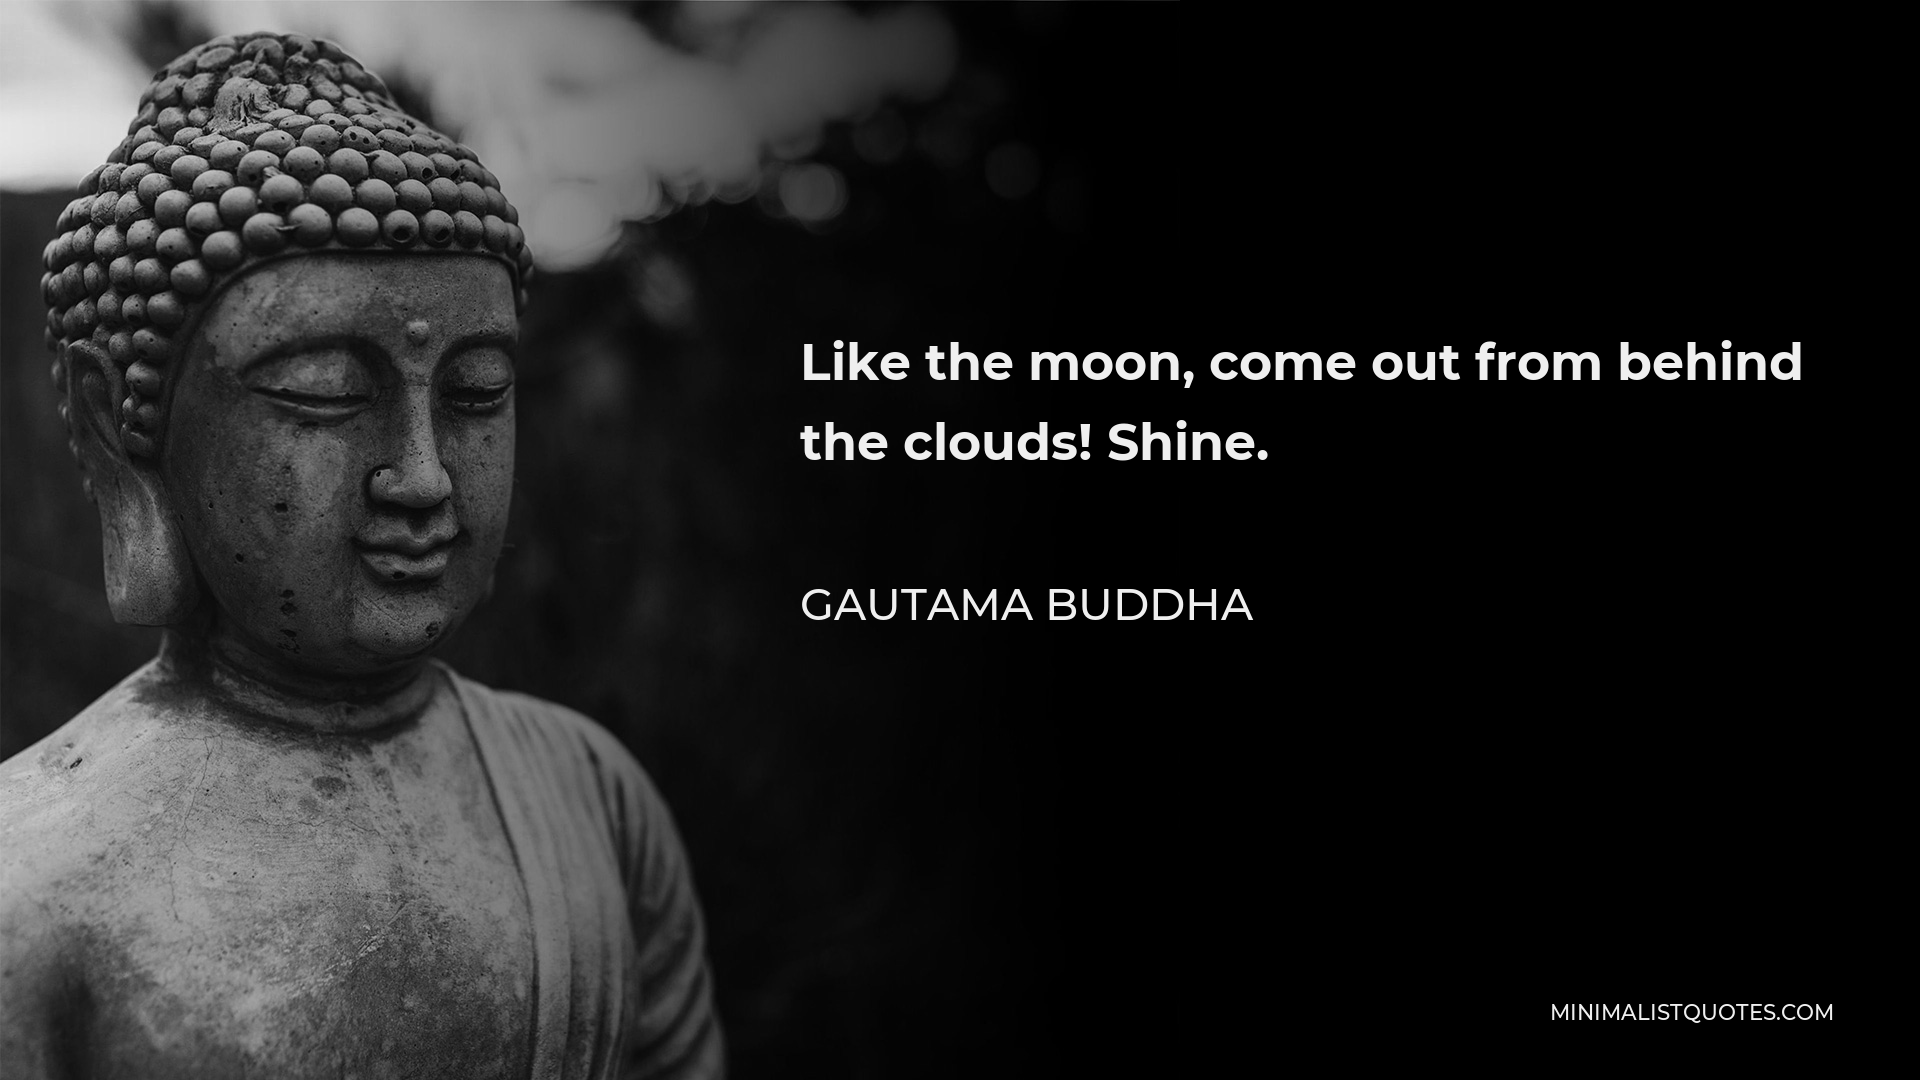 Gautama Buddha Quote - Like the moon, come out from behind the clouds! Shine.